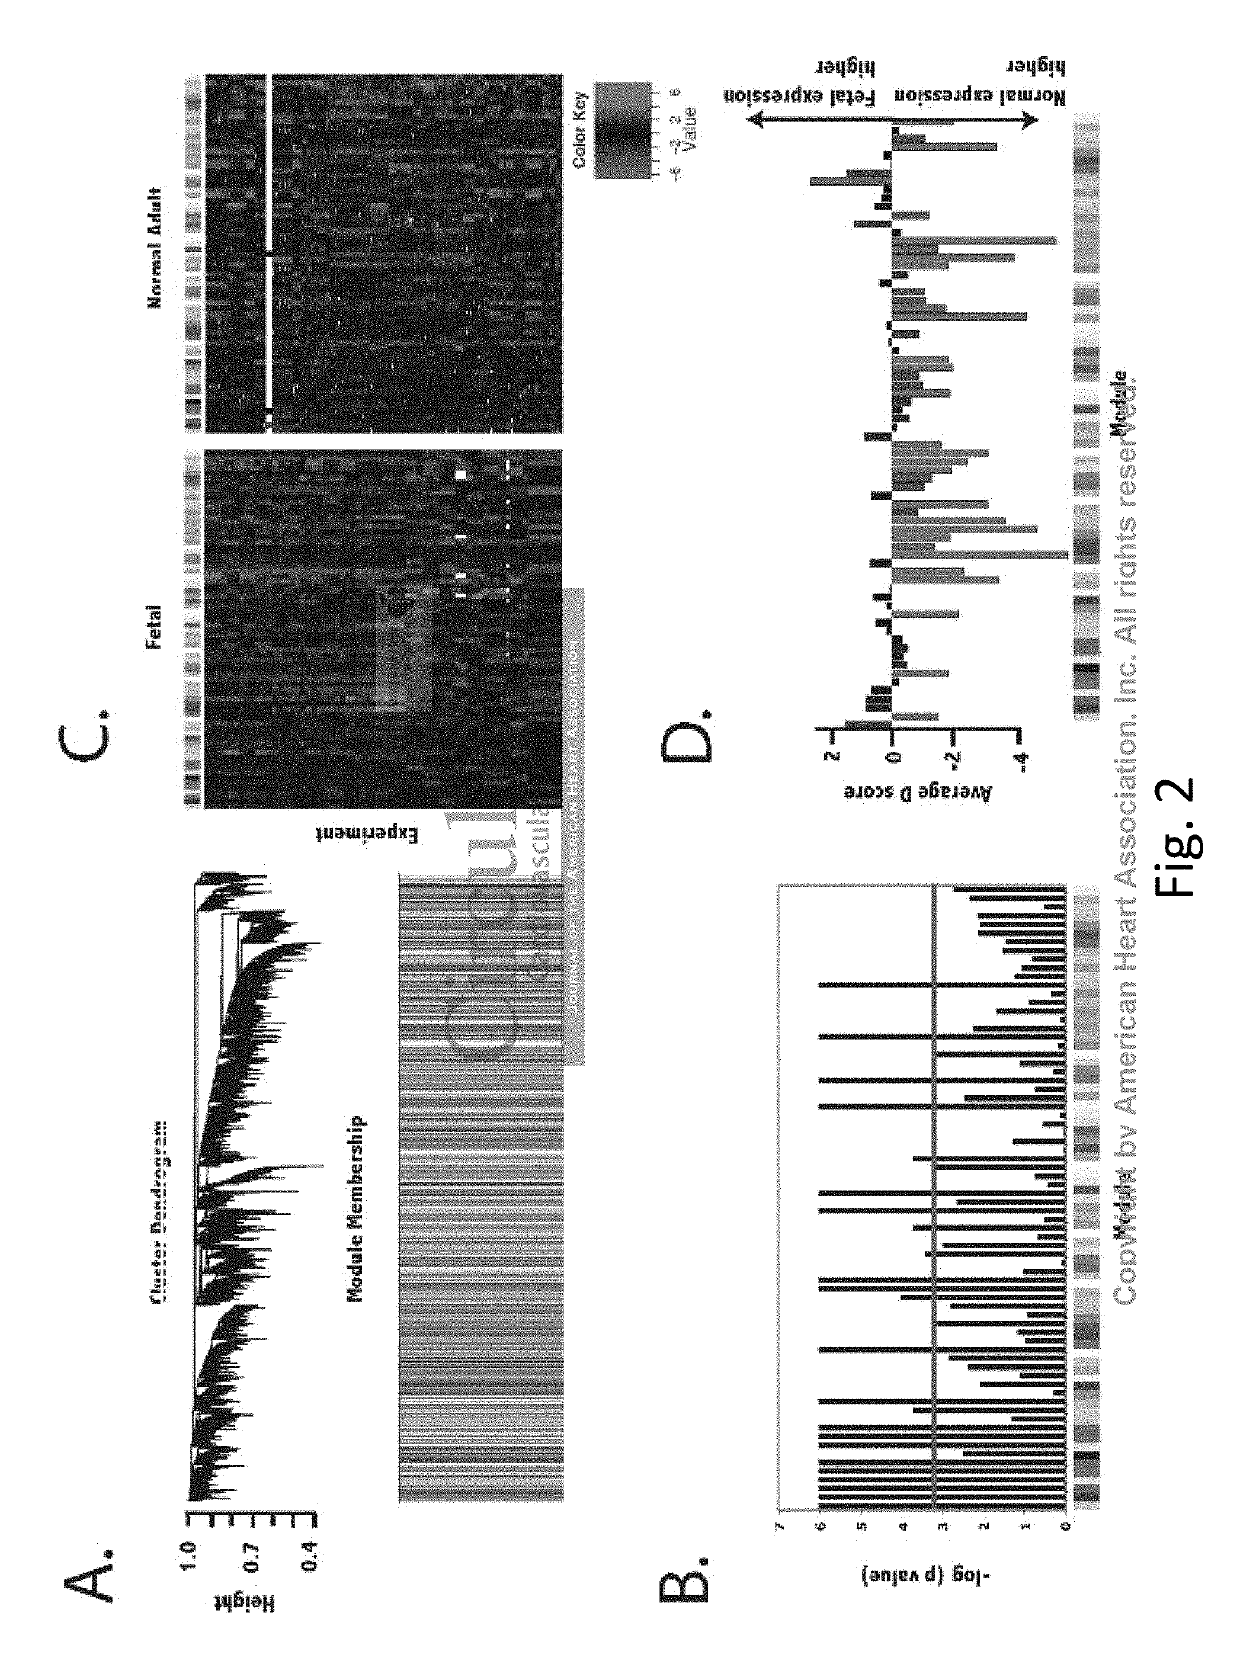 Method and system for network modeling to enlarge the search space of candidate genes for diseases